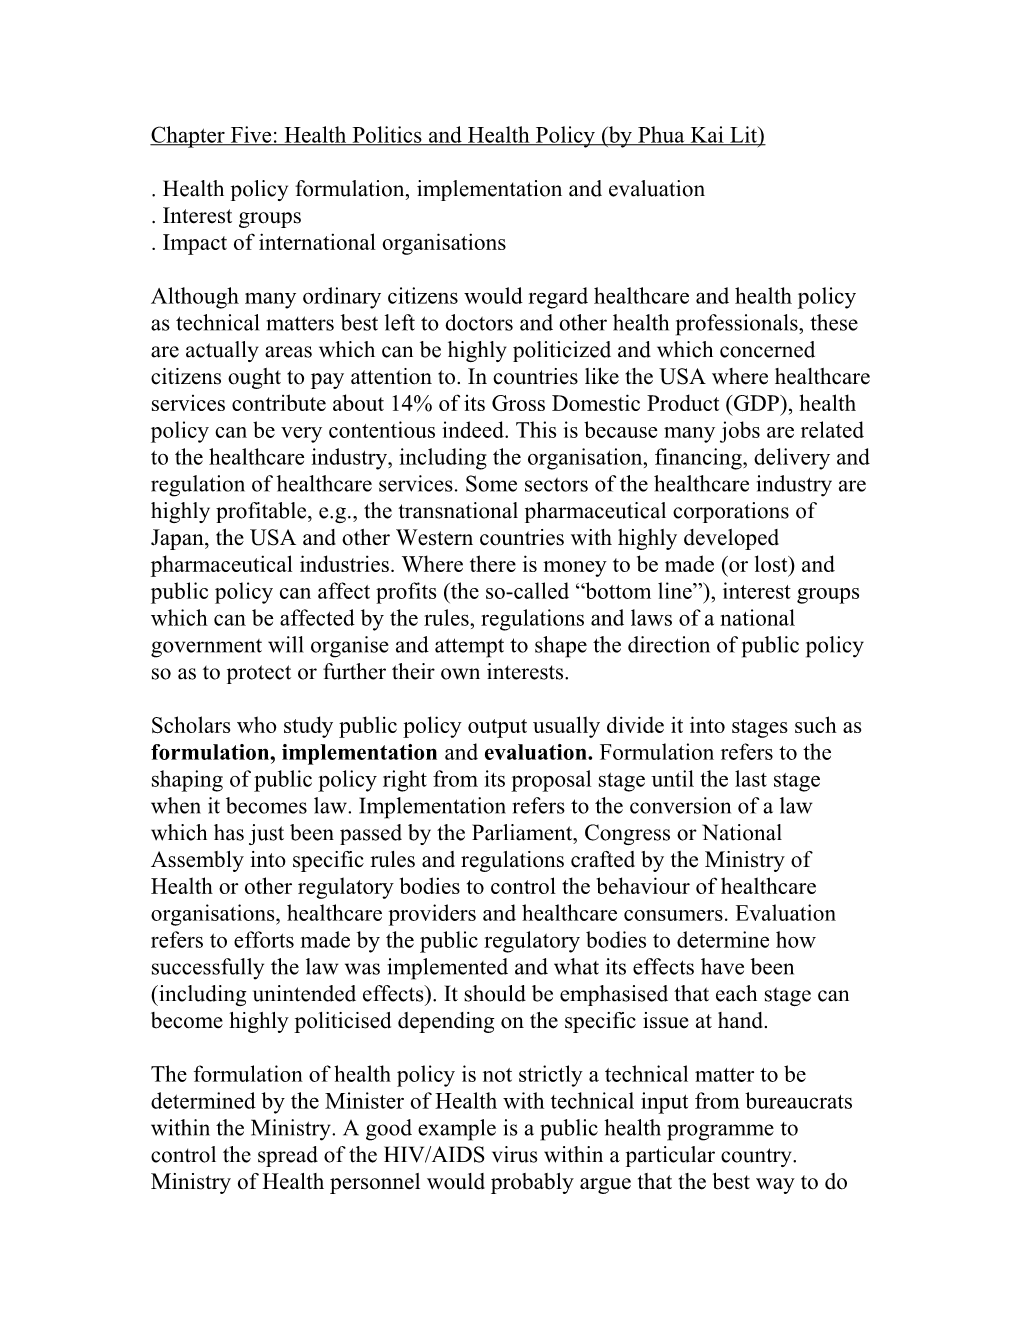 Chapter Five: Health Politics and Health Policy (By Phua Kai Lit)